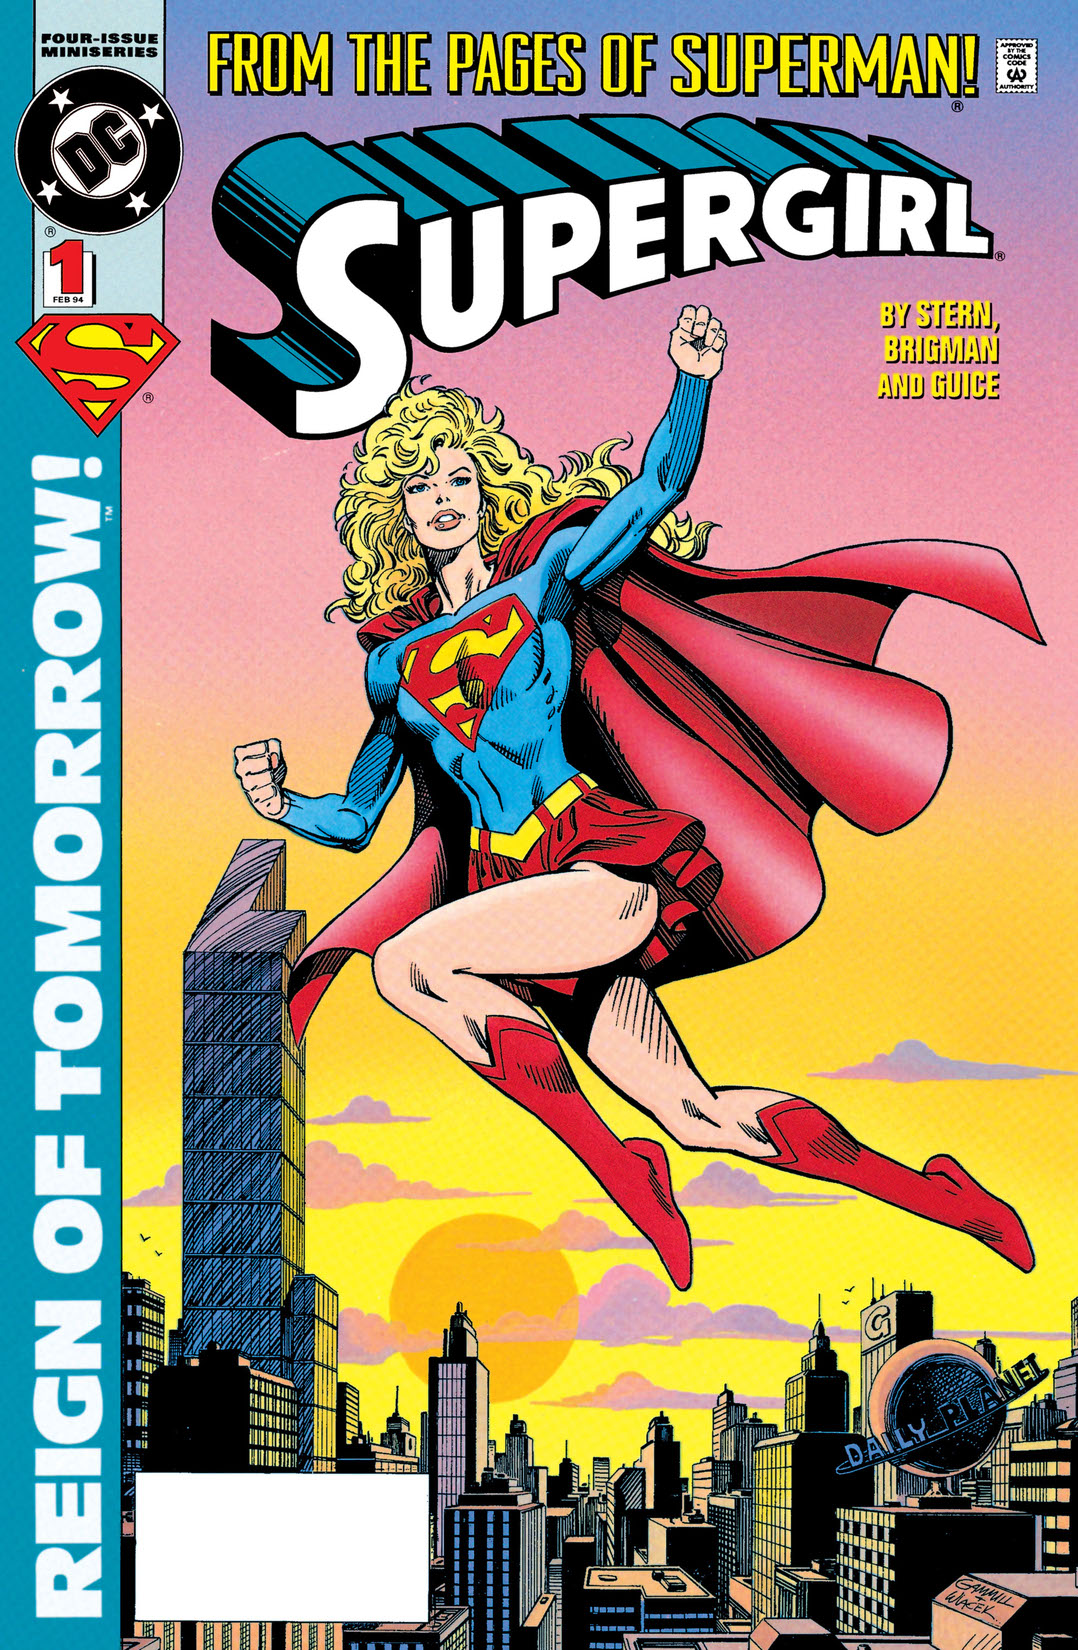 Supergirl (1993-) #1 preview images